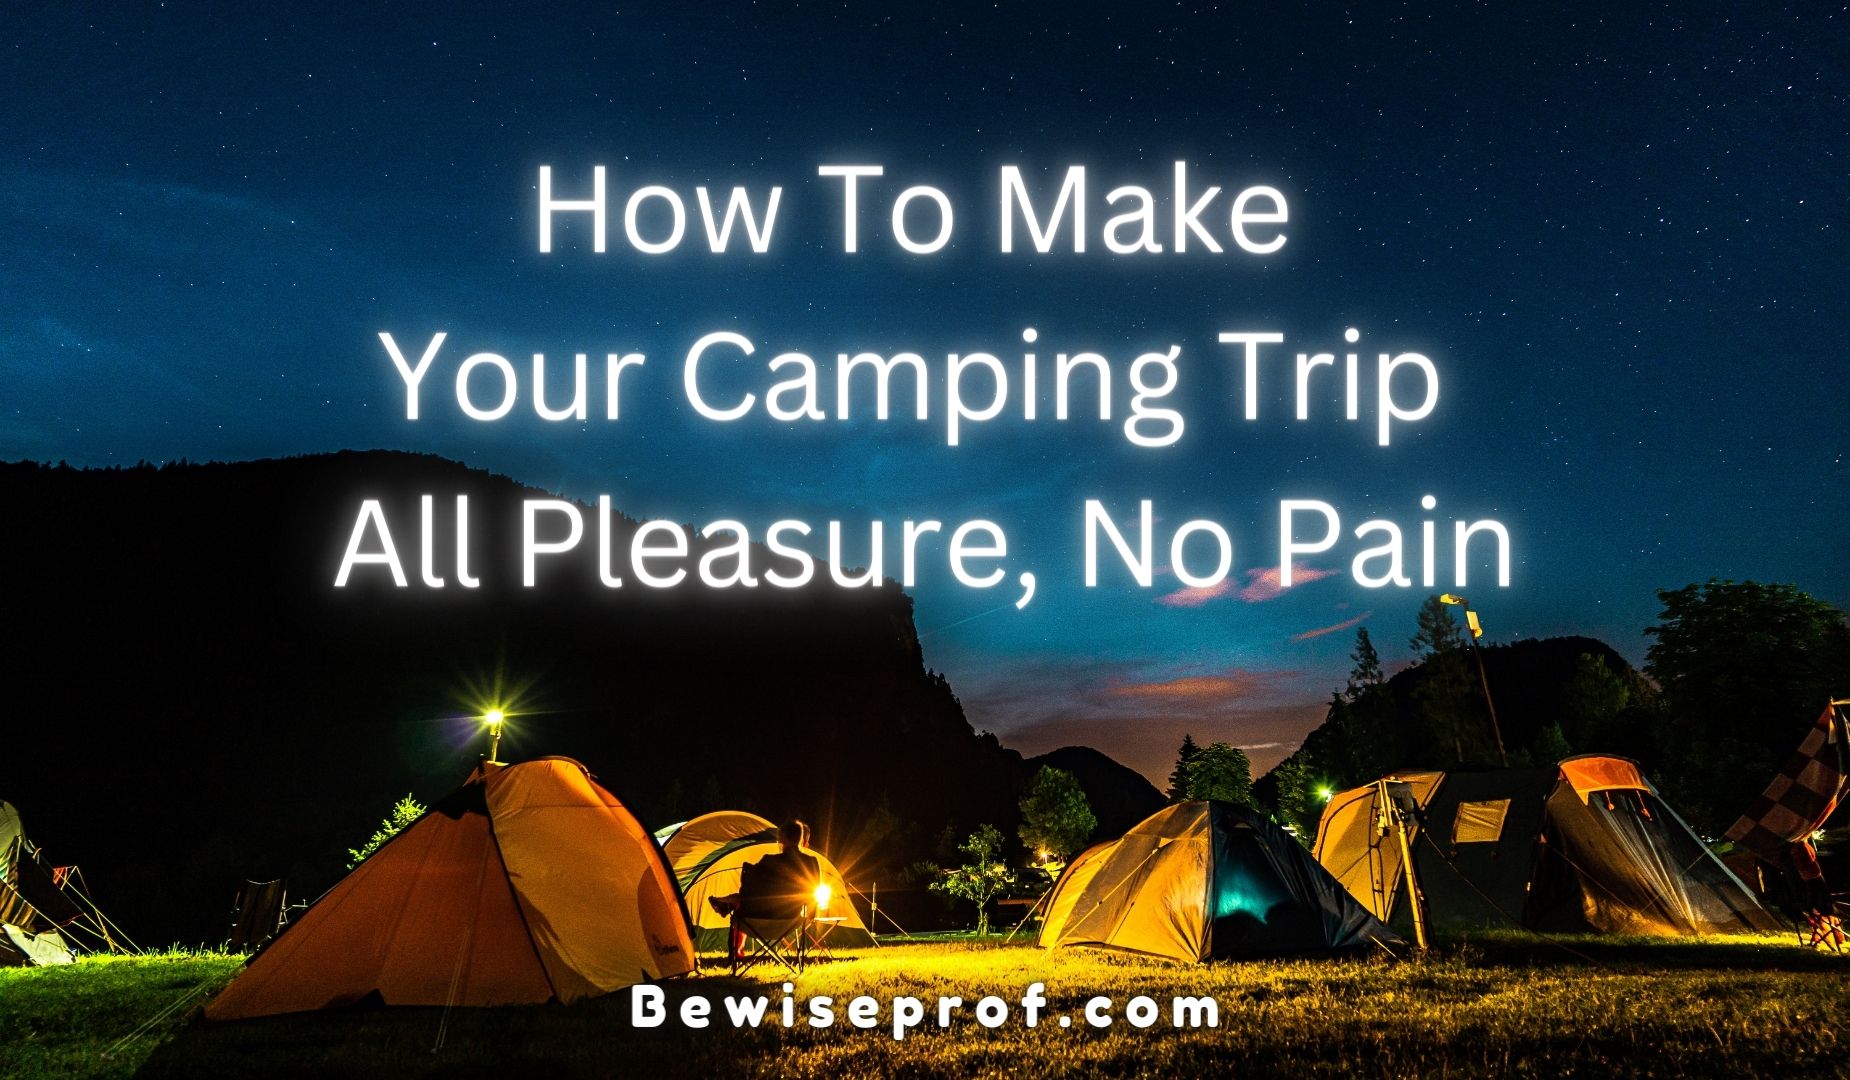 How To Make Your Camping Trip All Pleasure, No Pain